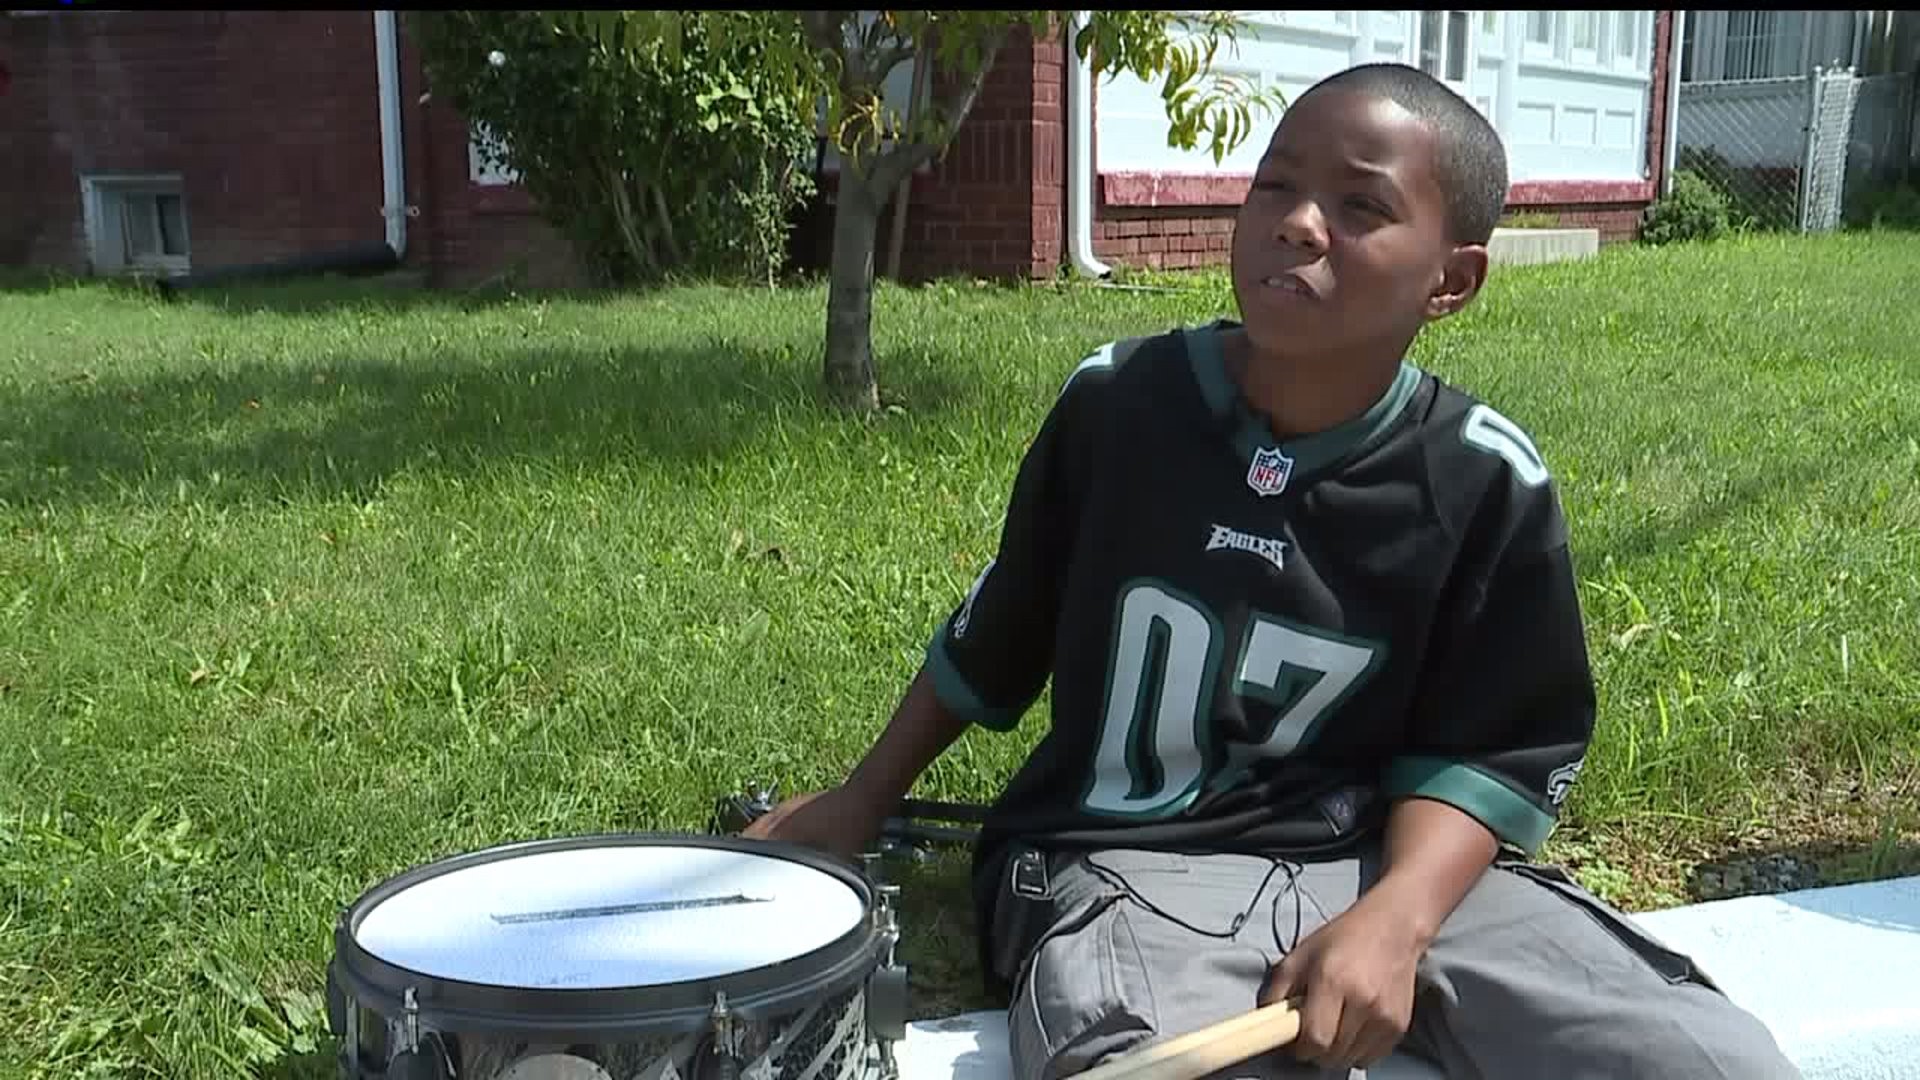 10-year-old York City drummer jams for a purpose